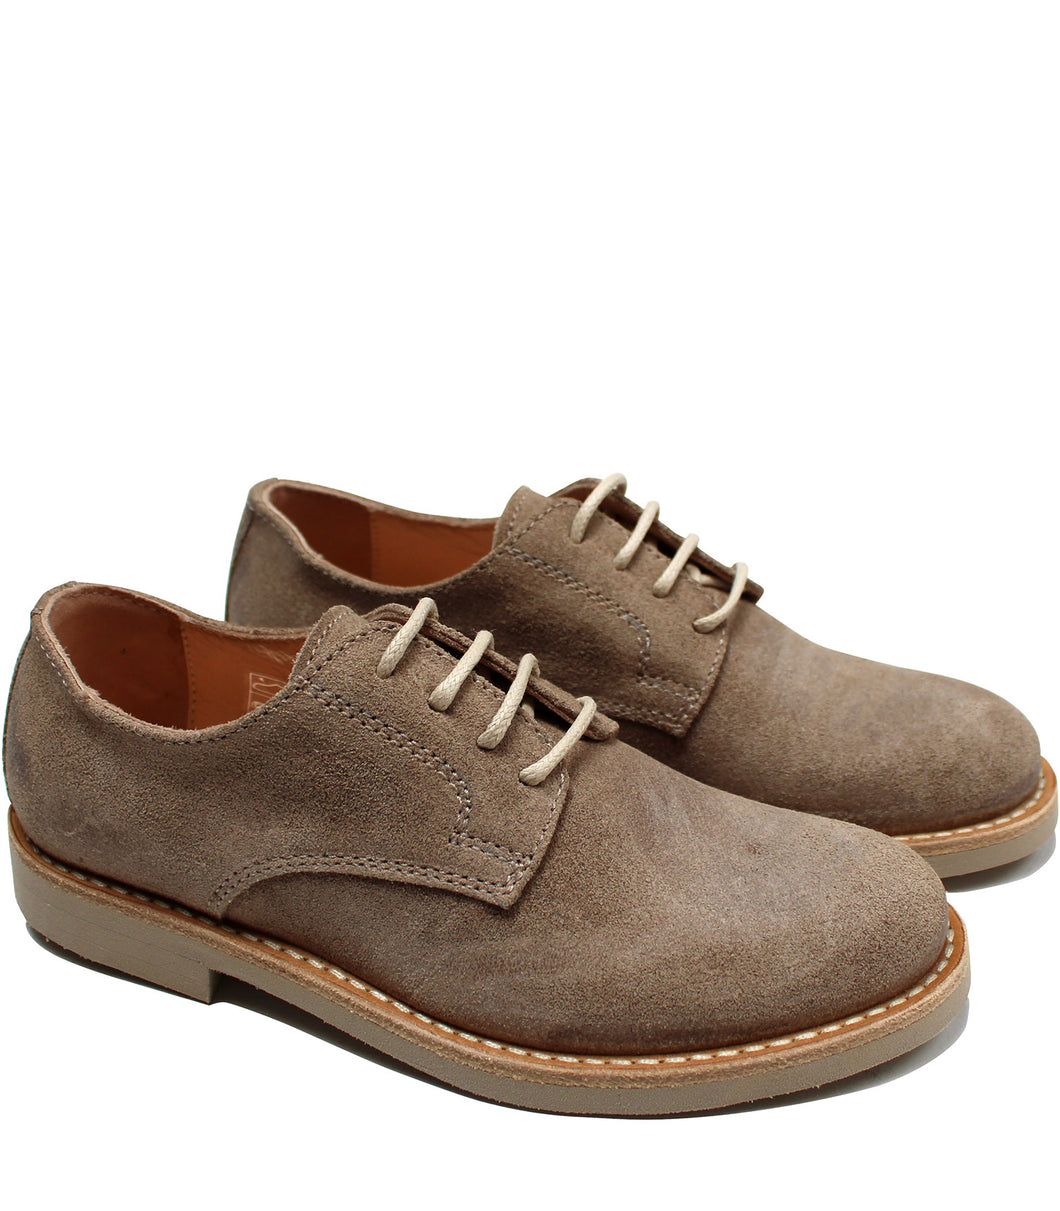 Natural derby in taupe suede